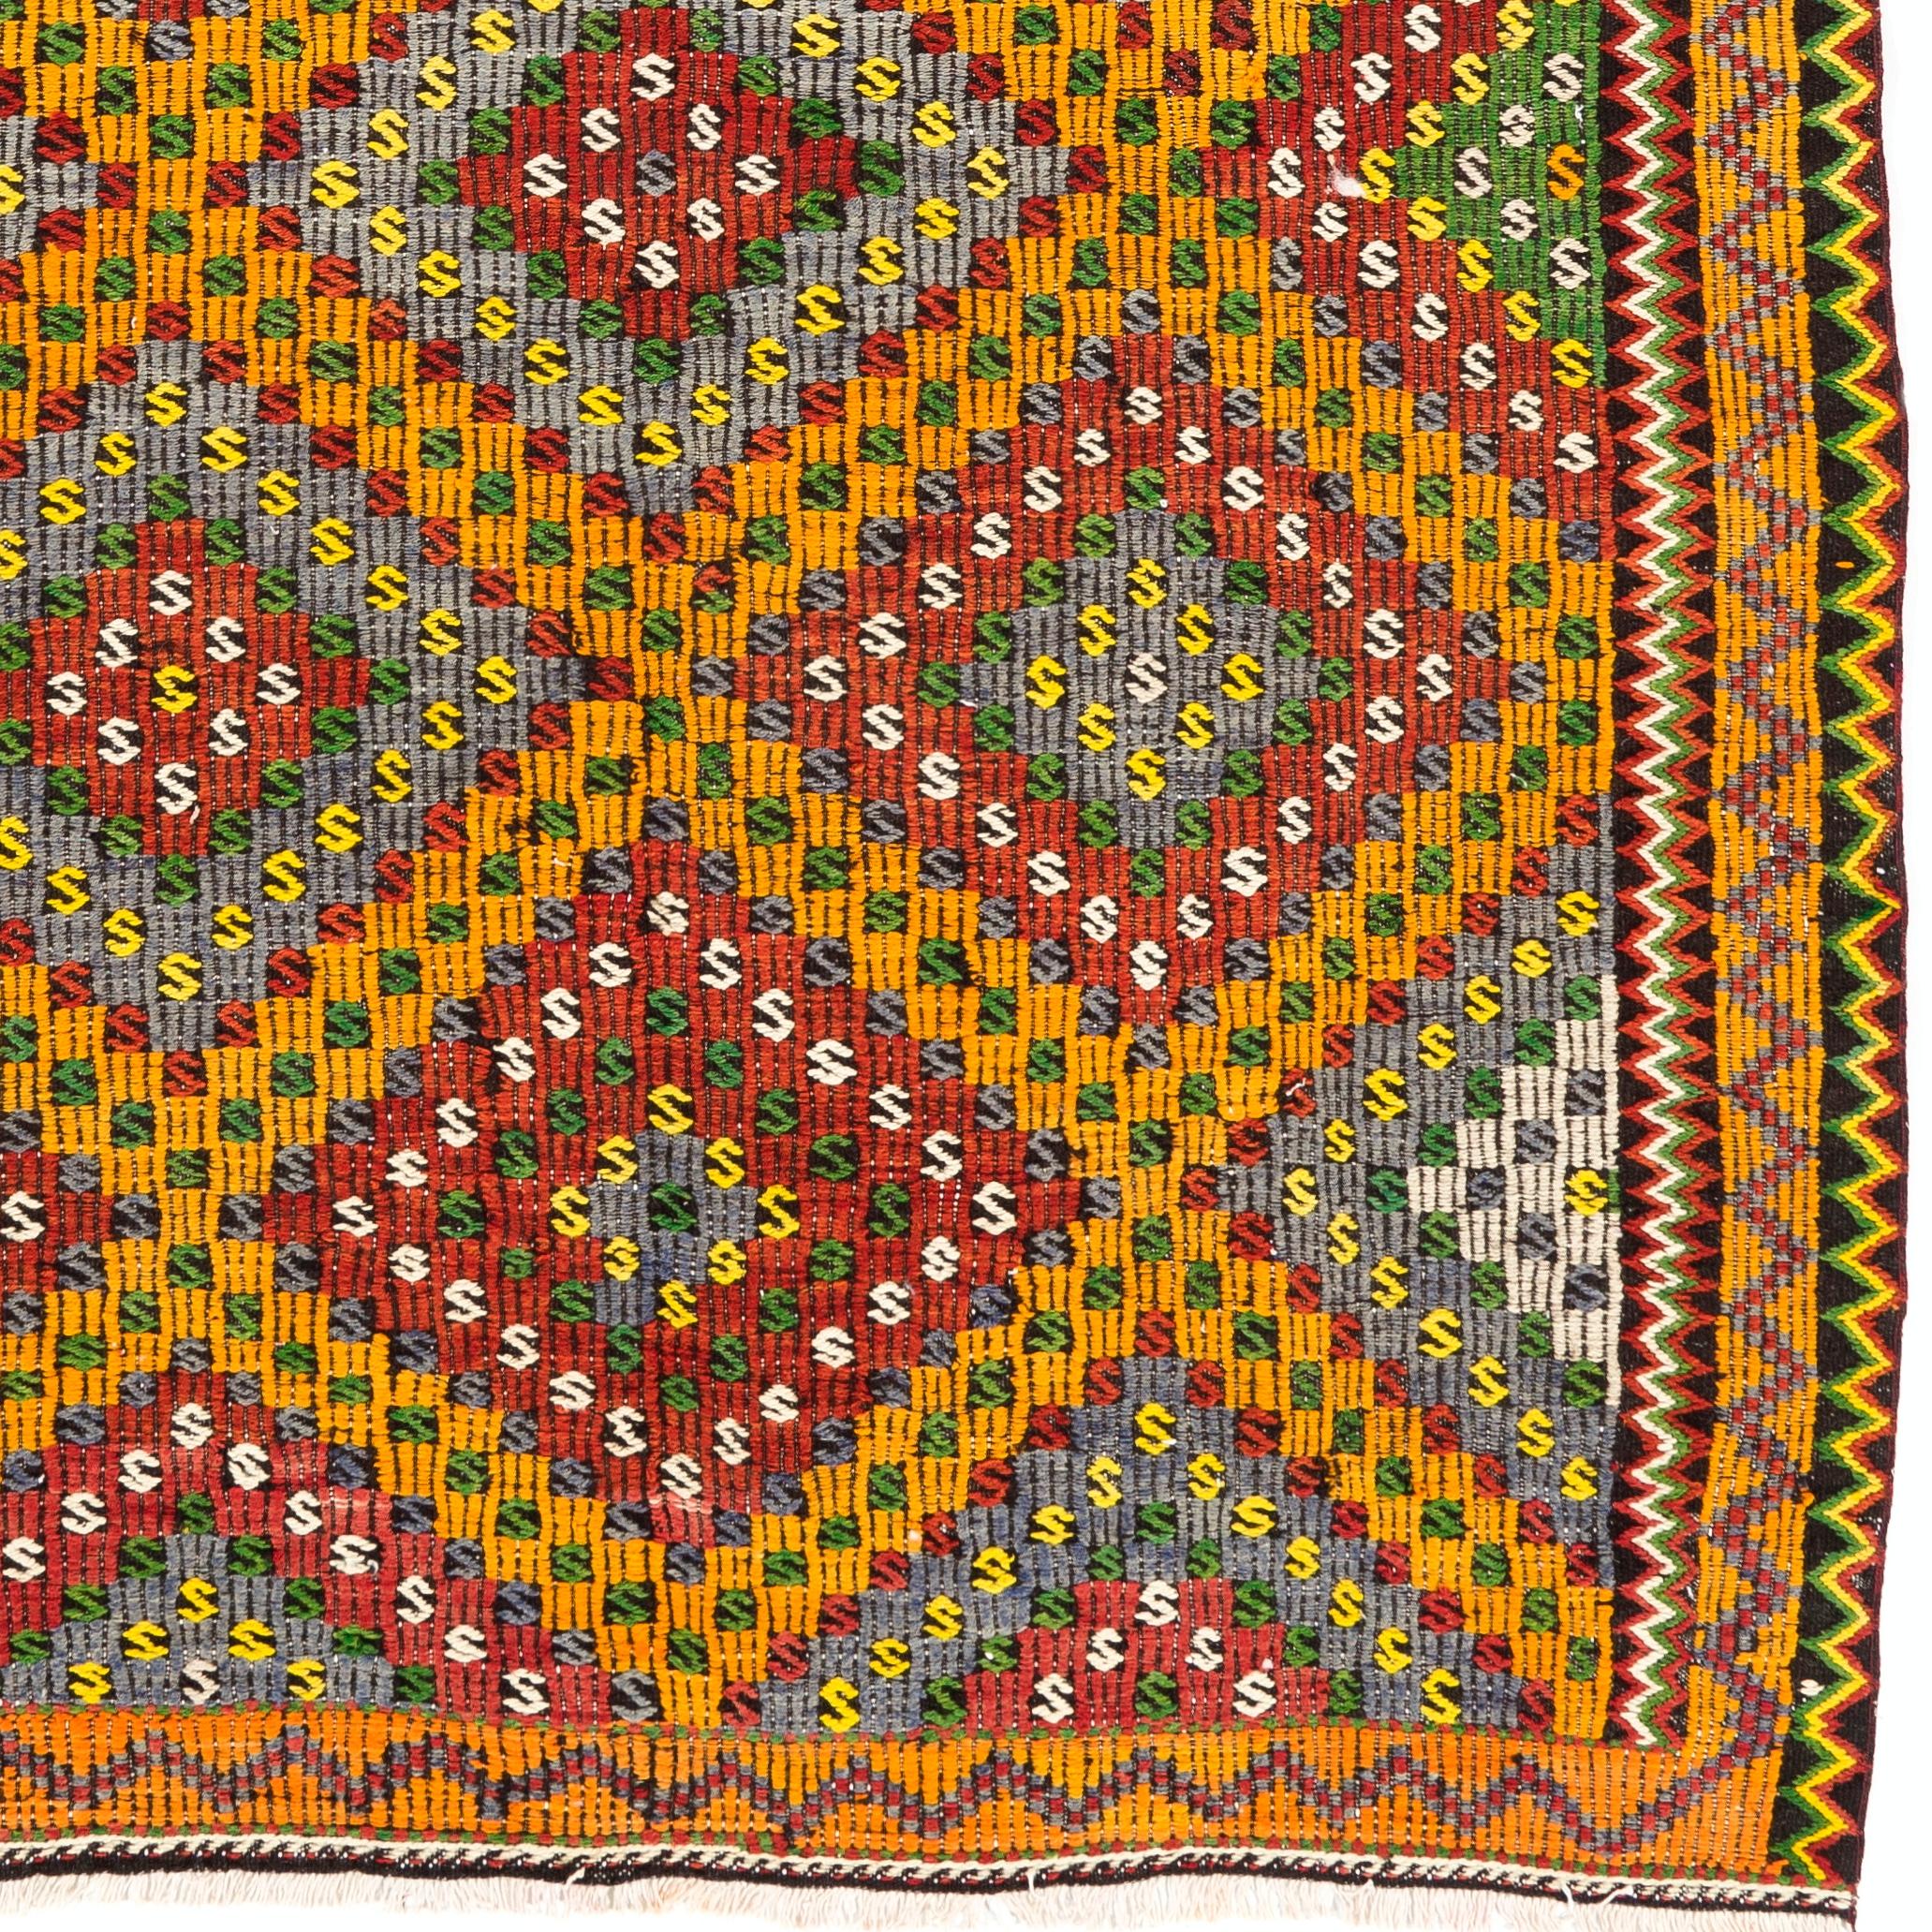 6x10.7 Ft Turkish Kilim in Red, Yellow, Green & Gray Colors. Dazzling Jijim Rug In Excellent Condition For Sale In Philadelphia, PA